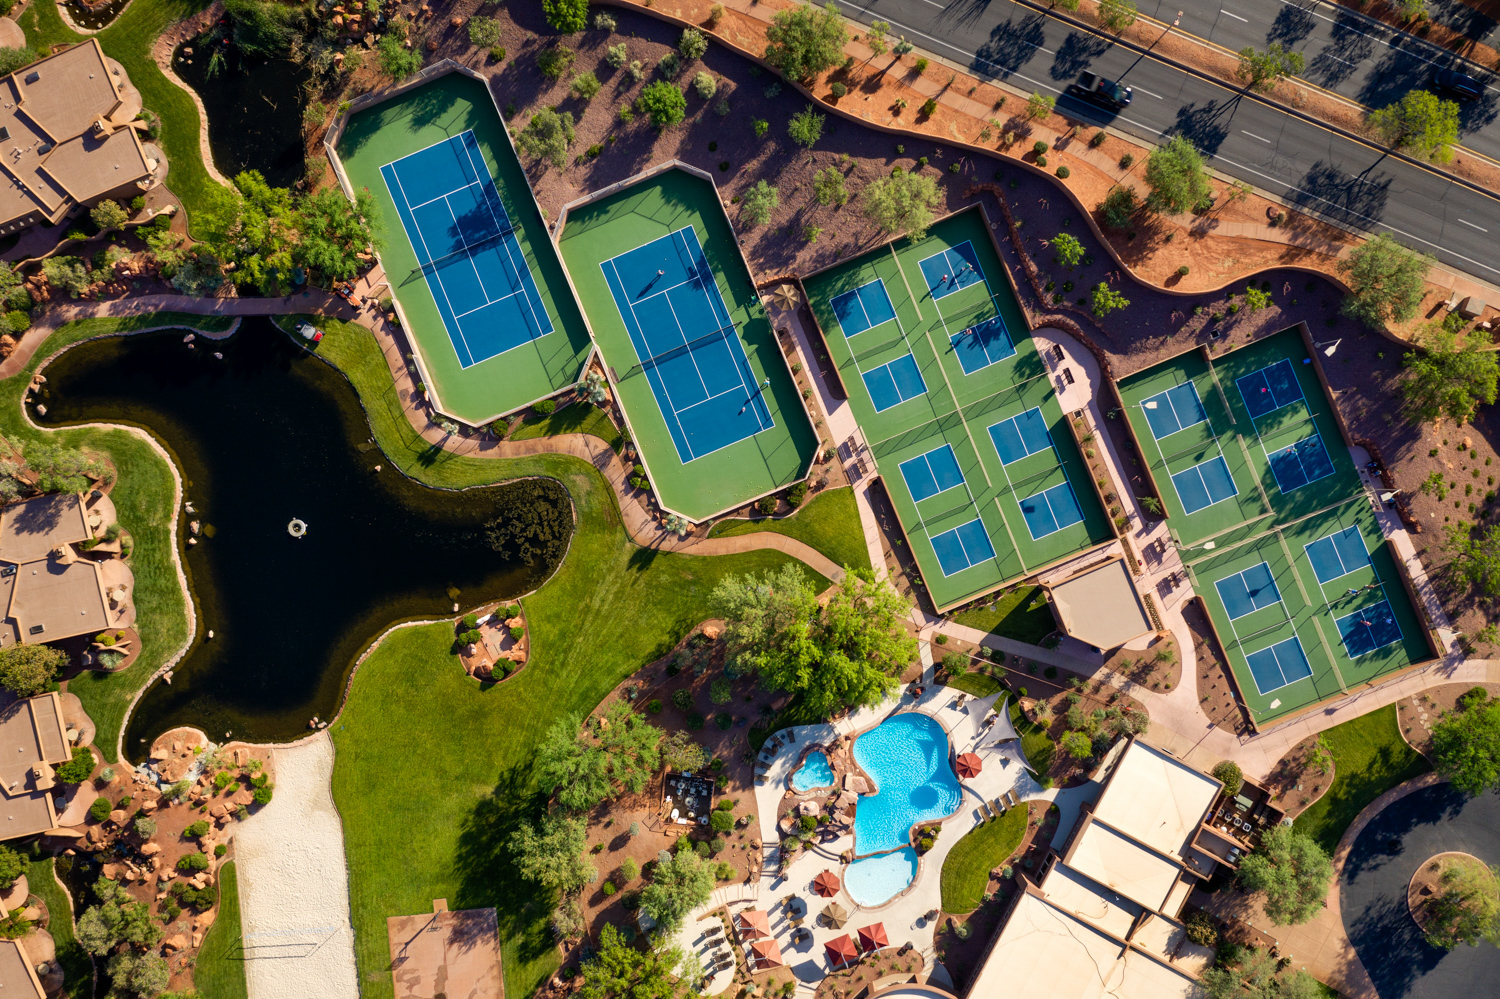 byron-mason-photography_commercial-aerial_st-george_entrada-tennis-pickleball-01-1500px